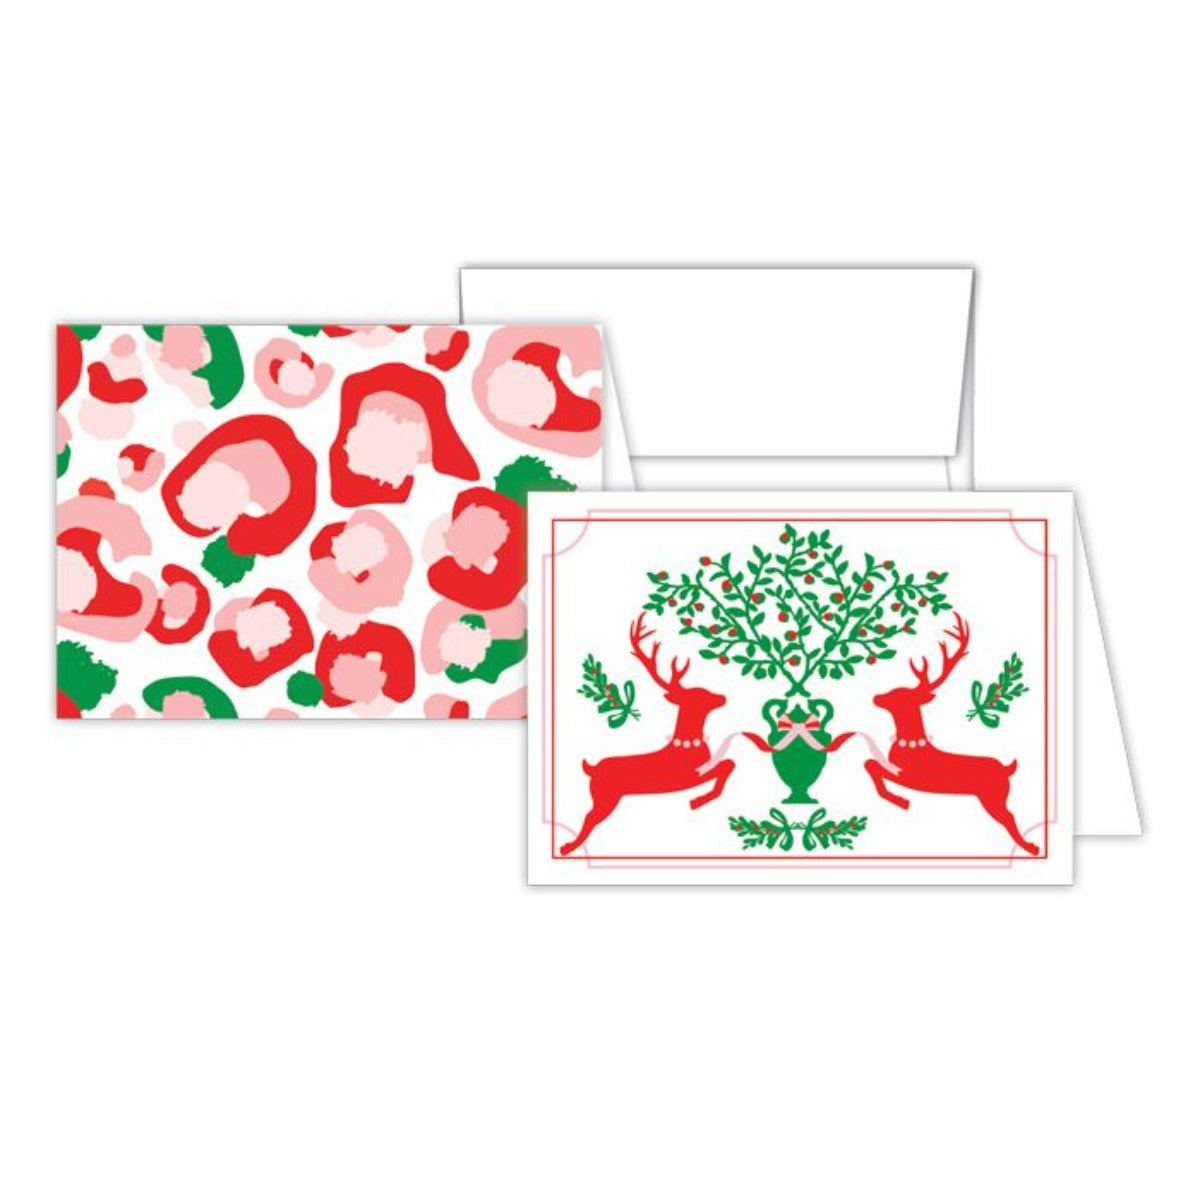 Stationery Notes - Royal Reindeer/Peppermint Spot Cheetah